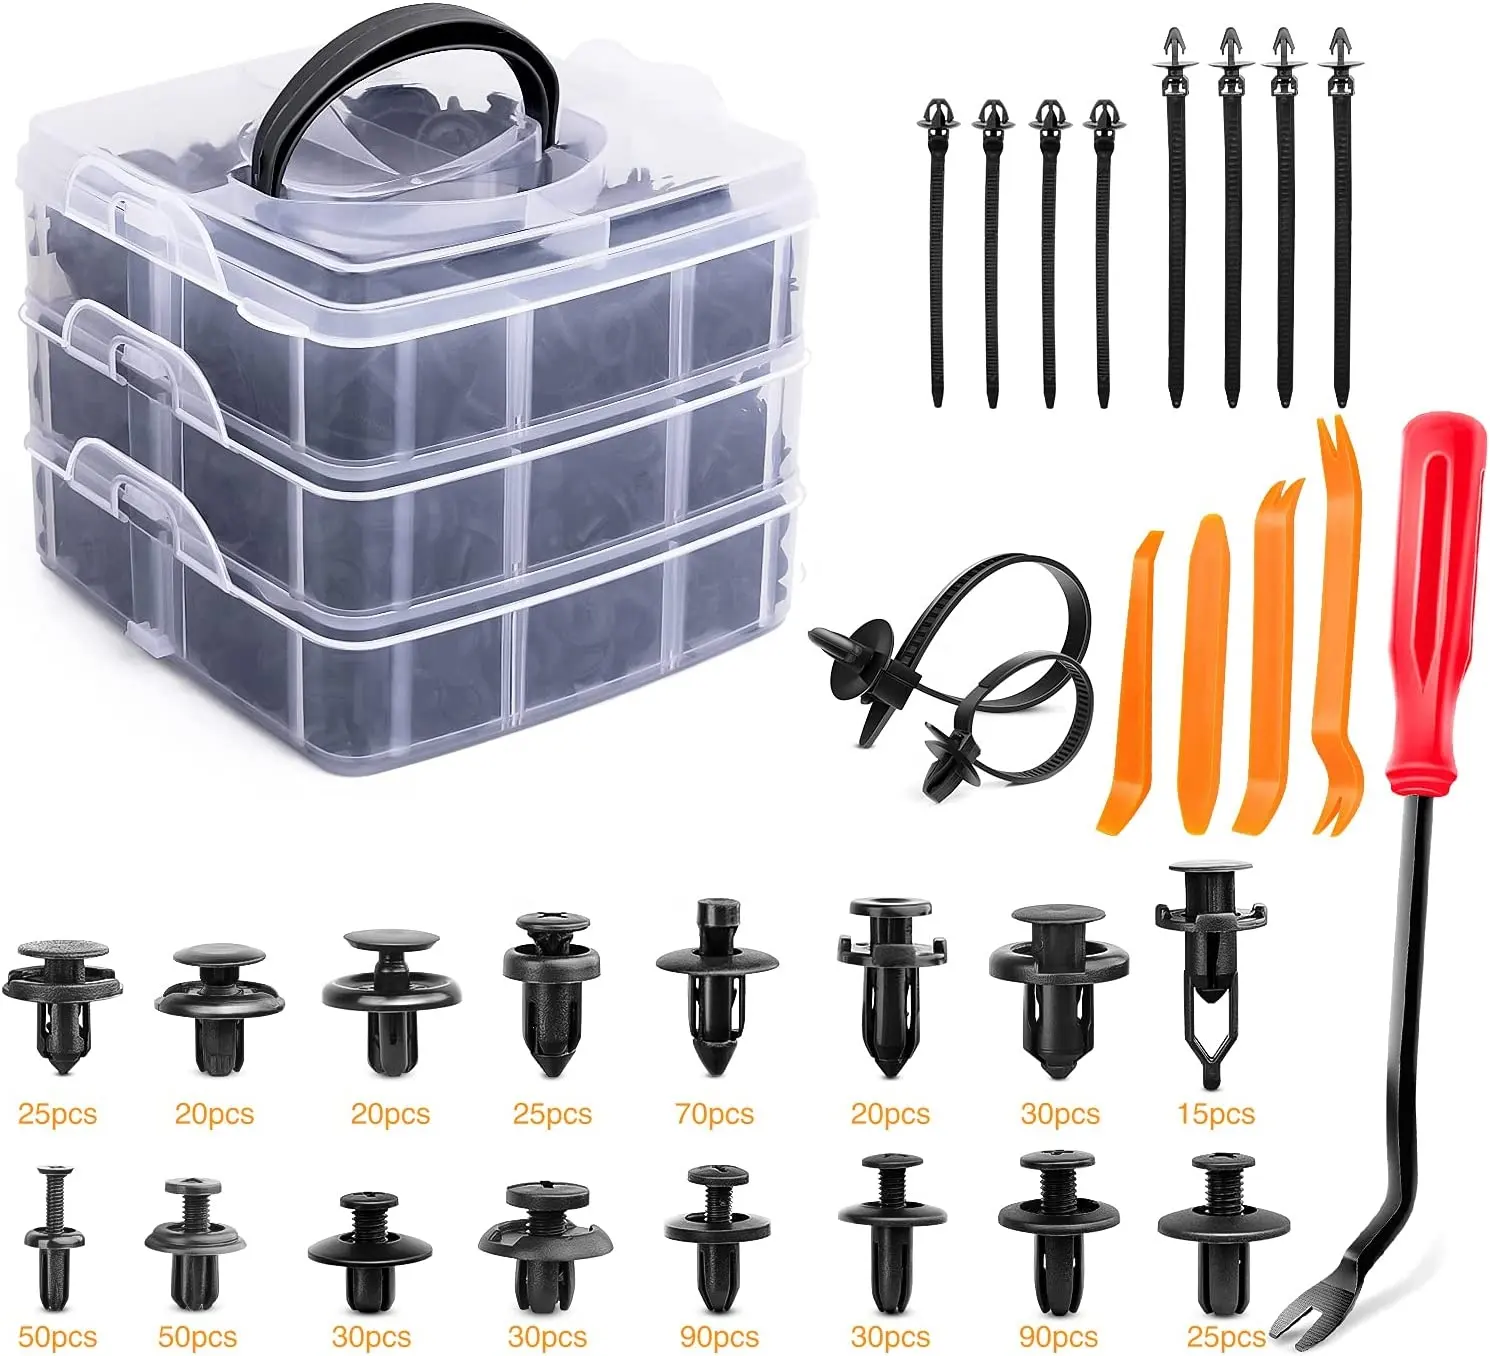 635Pcs Car Push Retainer Clips & Auto Fasteners Assortment -Most Popular Sizes Nylon Bumper Fender Rivets with 10 Cable Ties